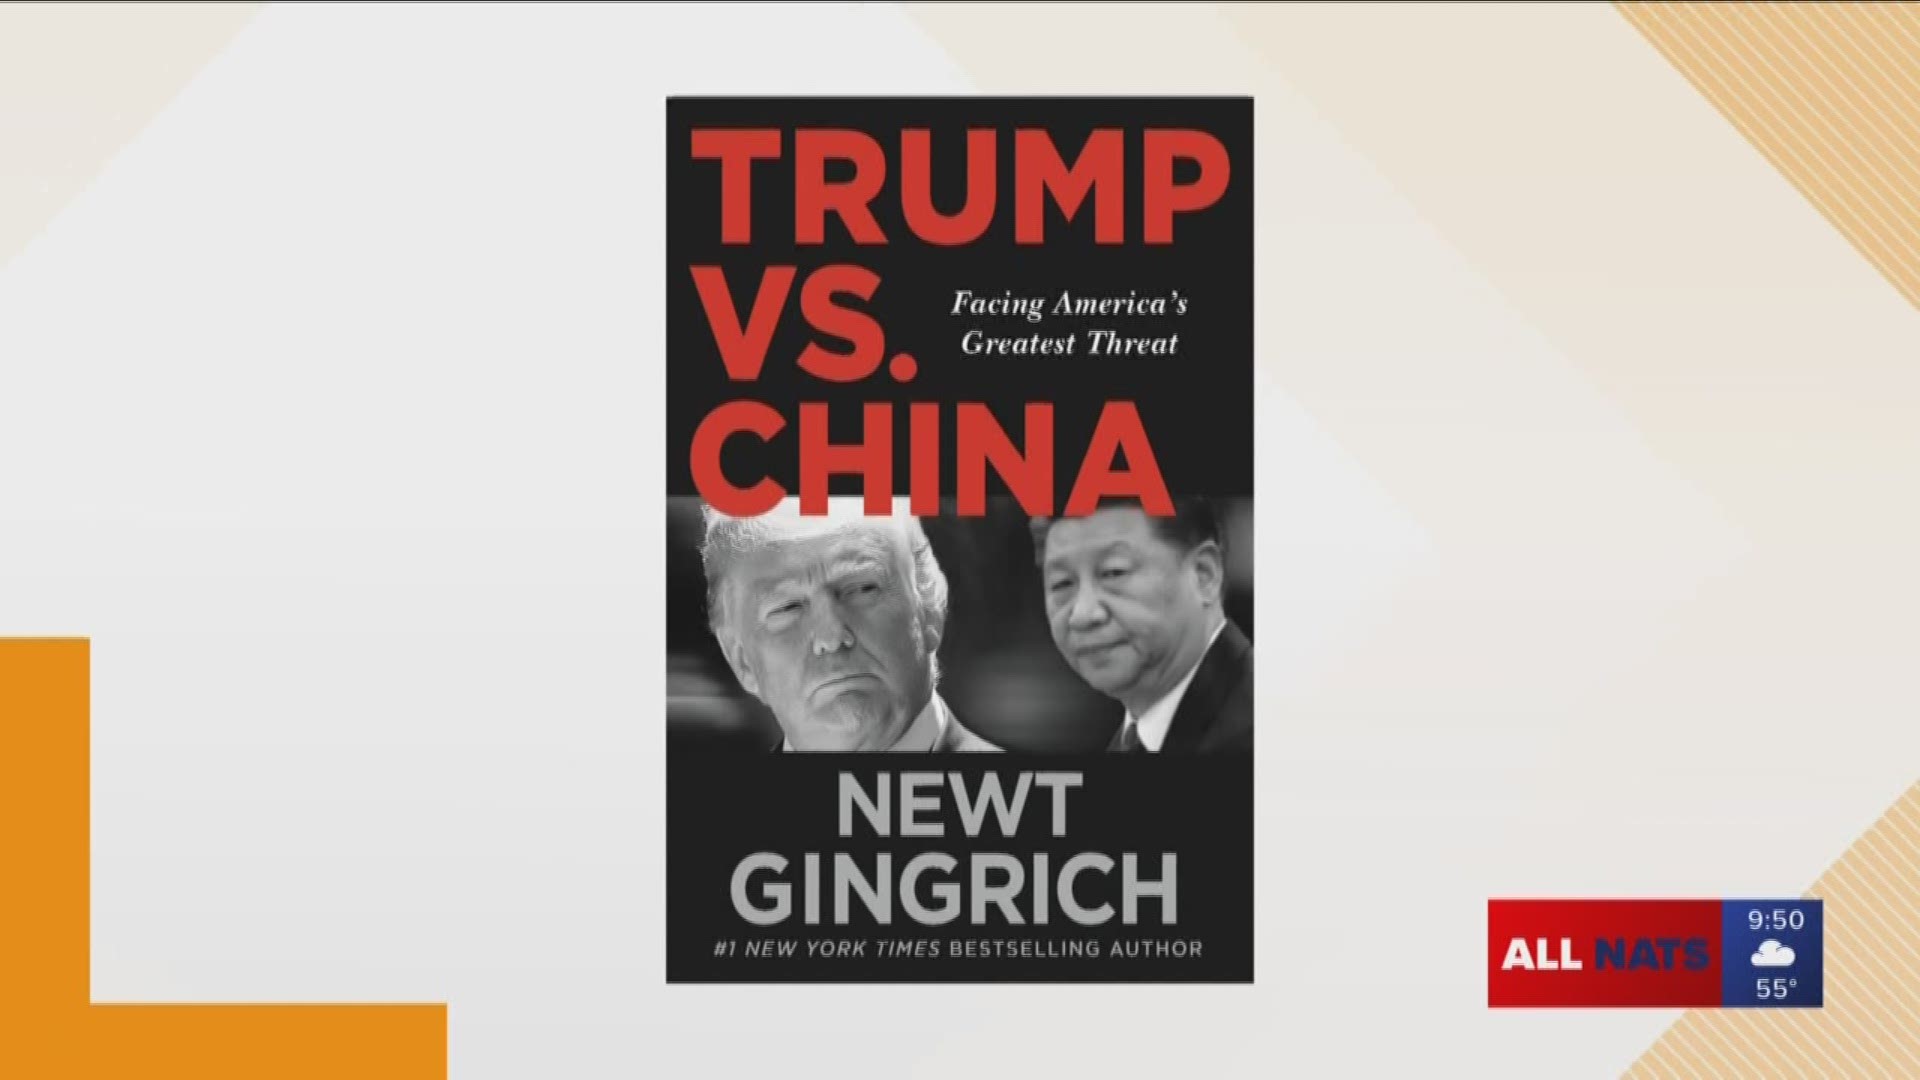 Former House Speaker Newt Gingrich chats with Kristen about his latest book, "Trump vs. China" and what he calls America's greatest threat.